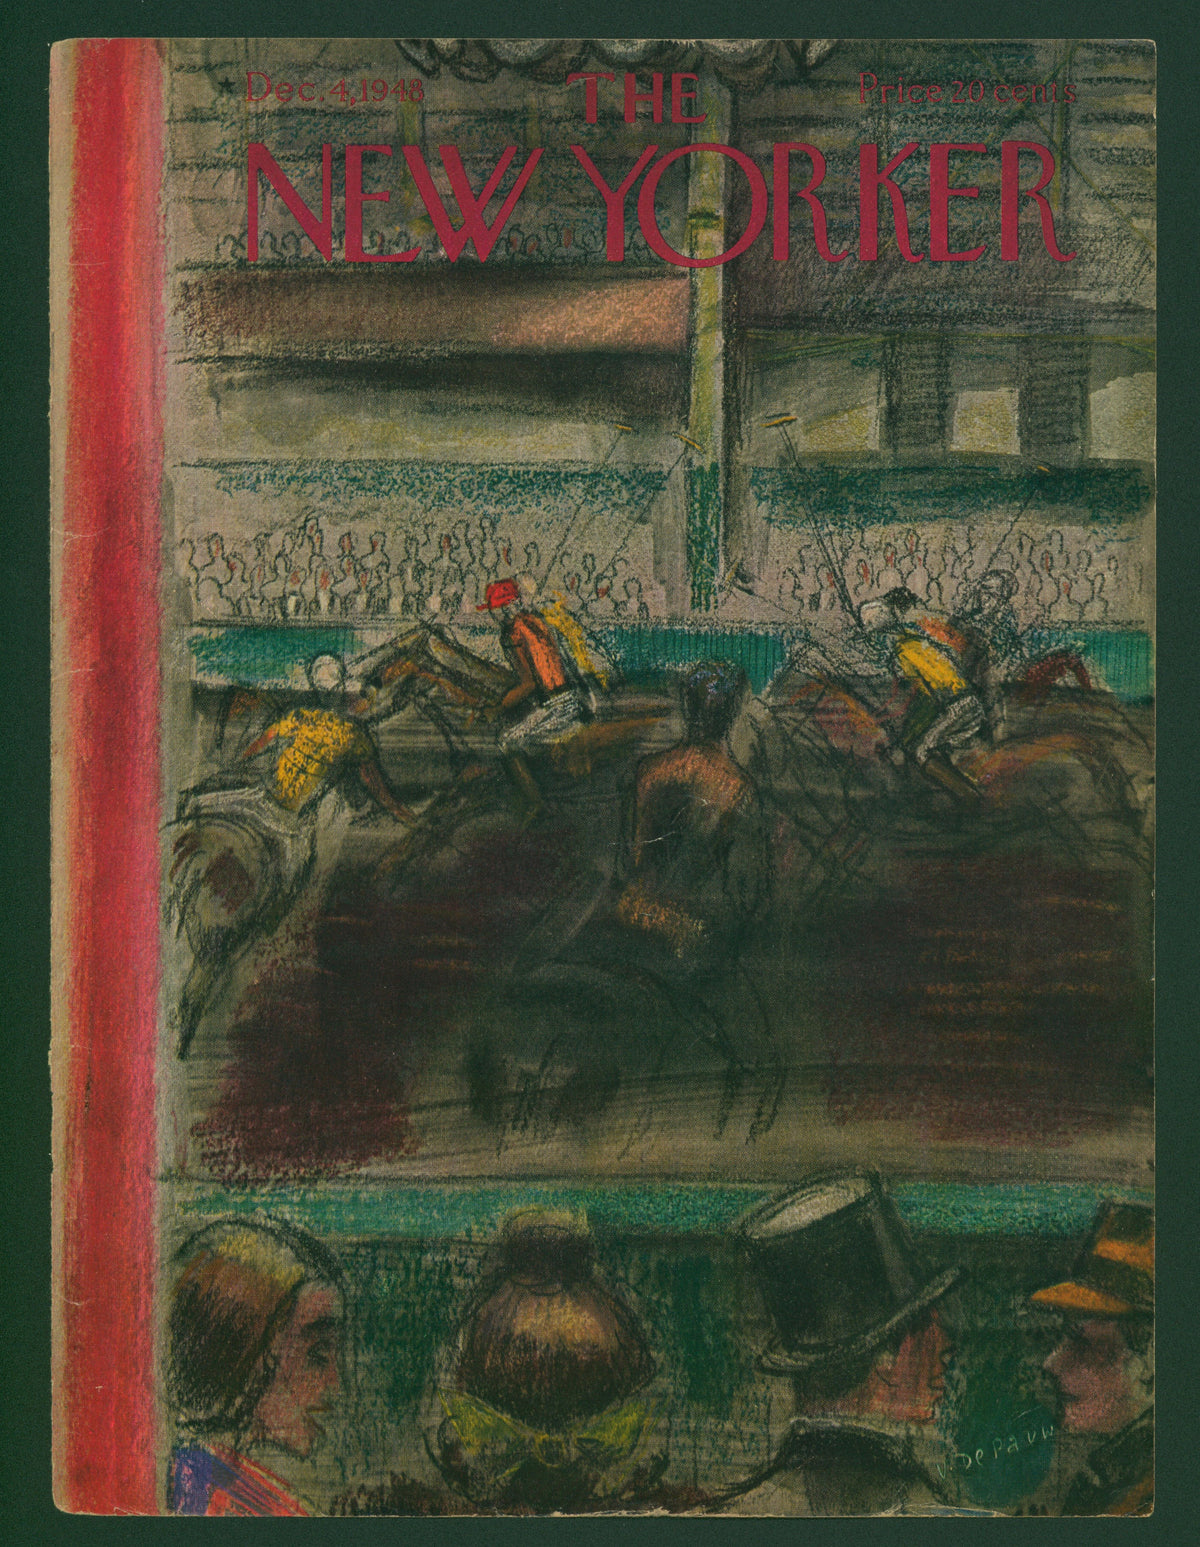 Polo Match- The New Yorker - Authentic Vintage Antique Print